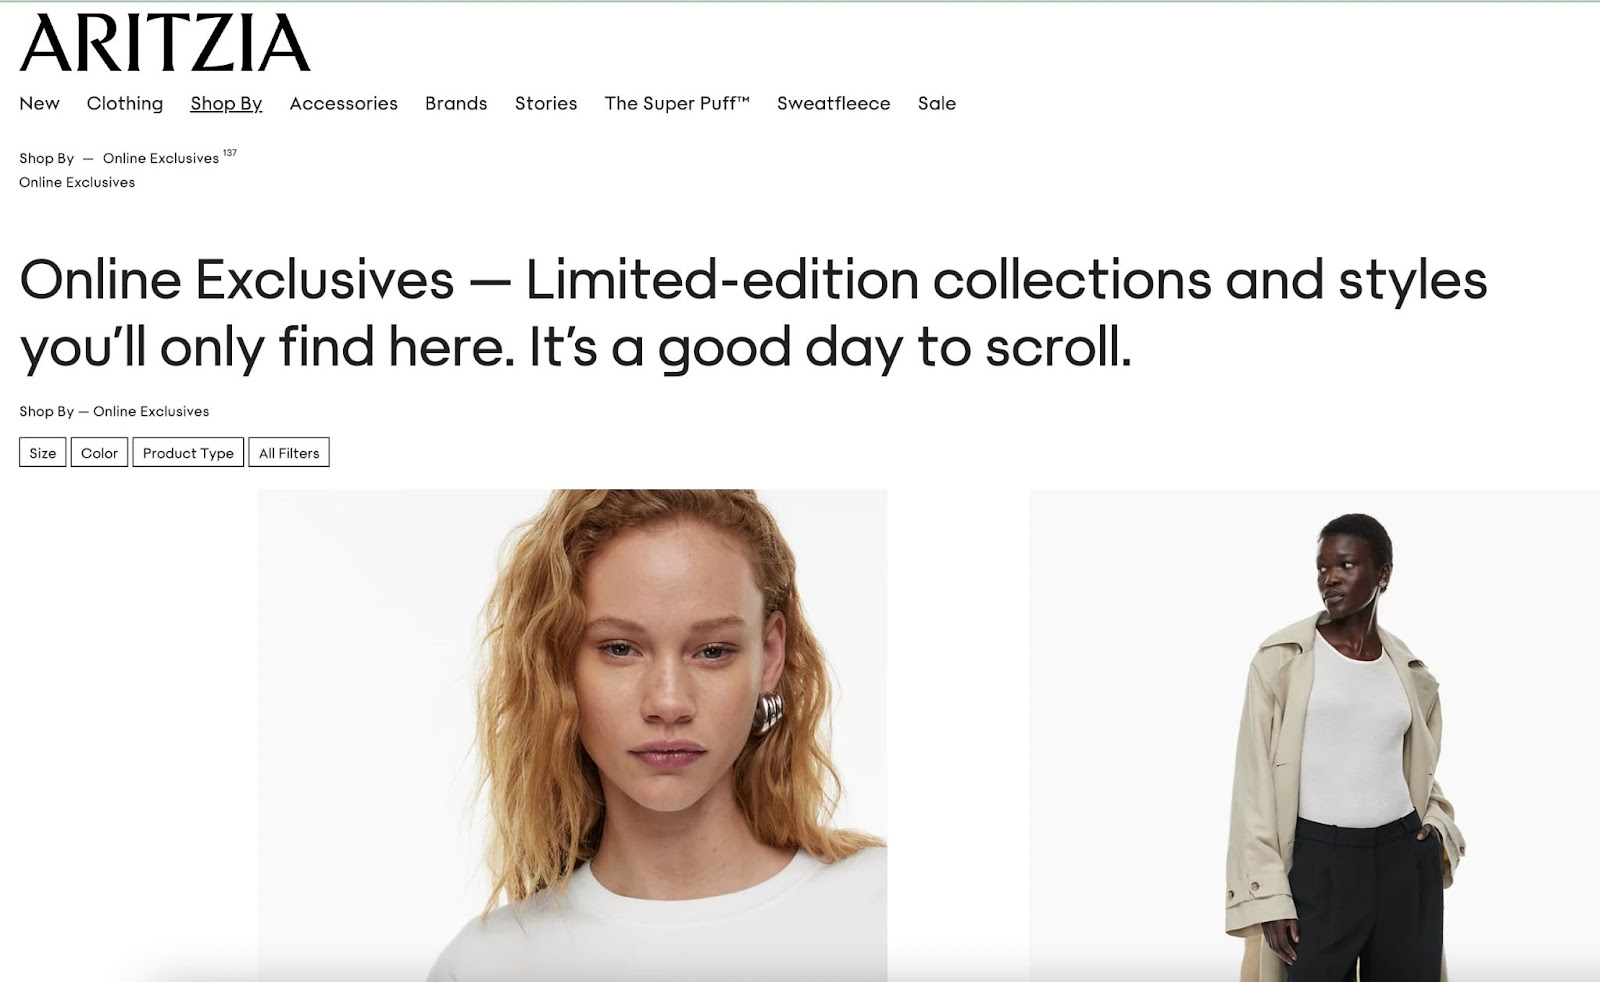 Aritzia’s limited-edition collection